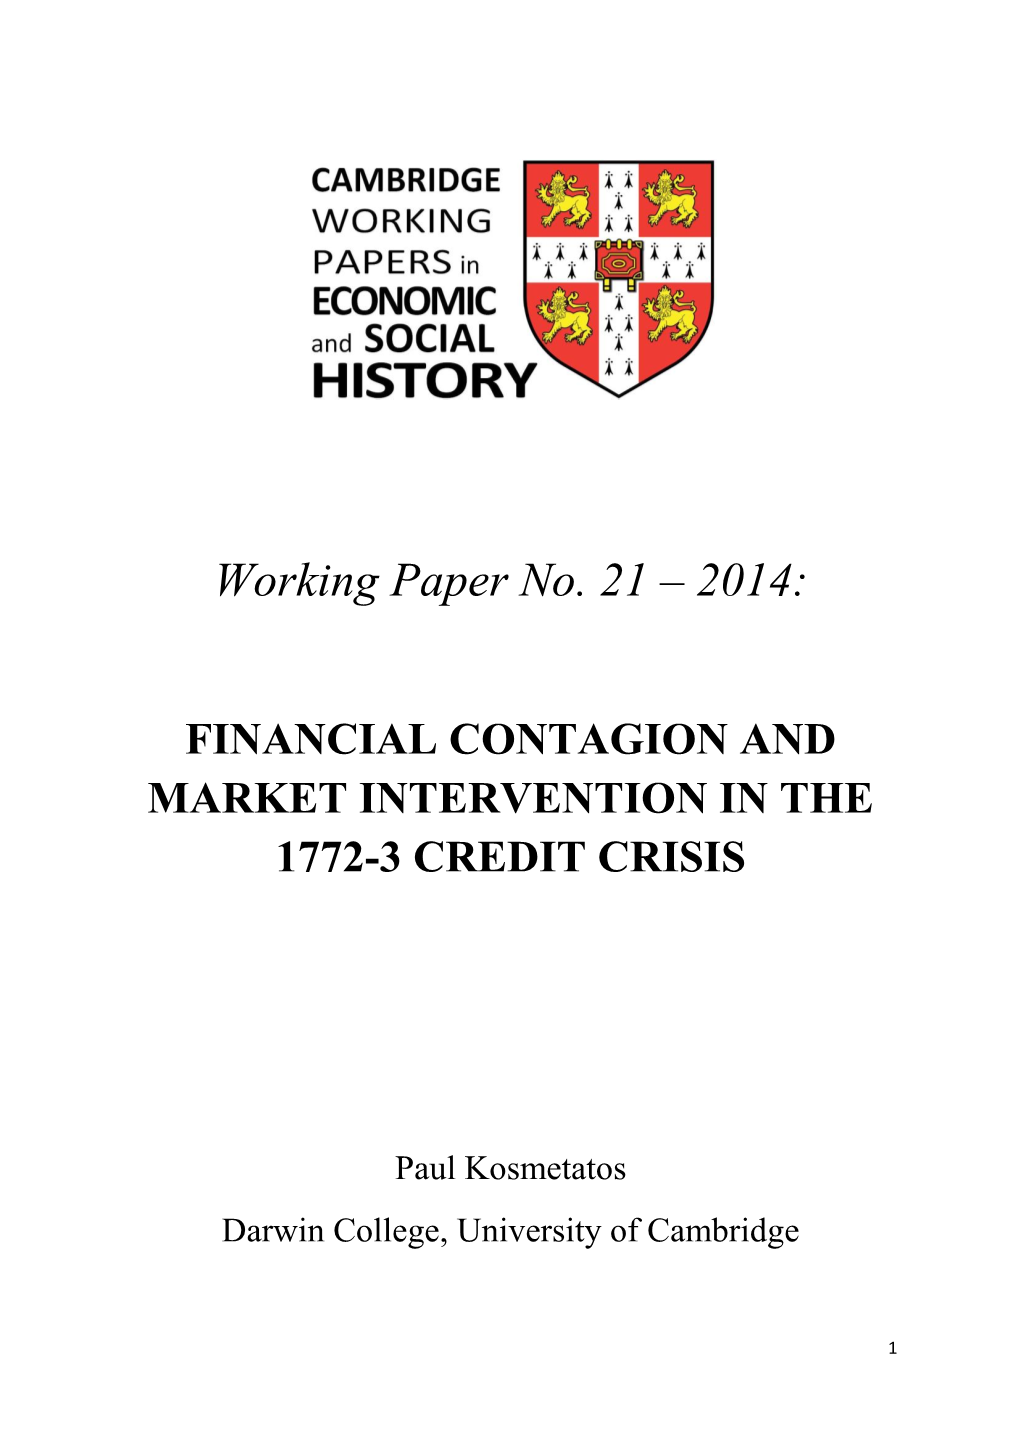 21. Financial Contagion and Market Intervention in the 1772-3 Credit Crisis